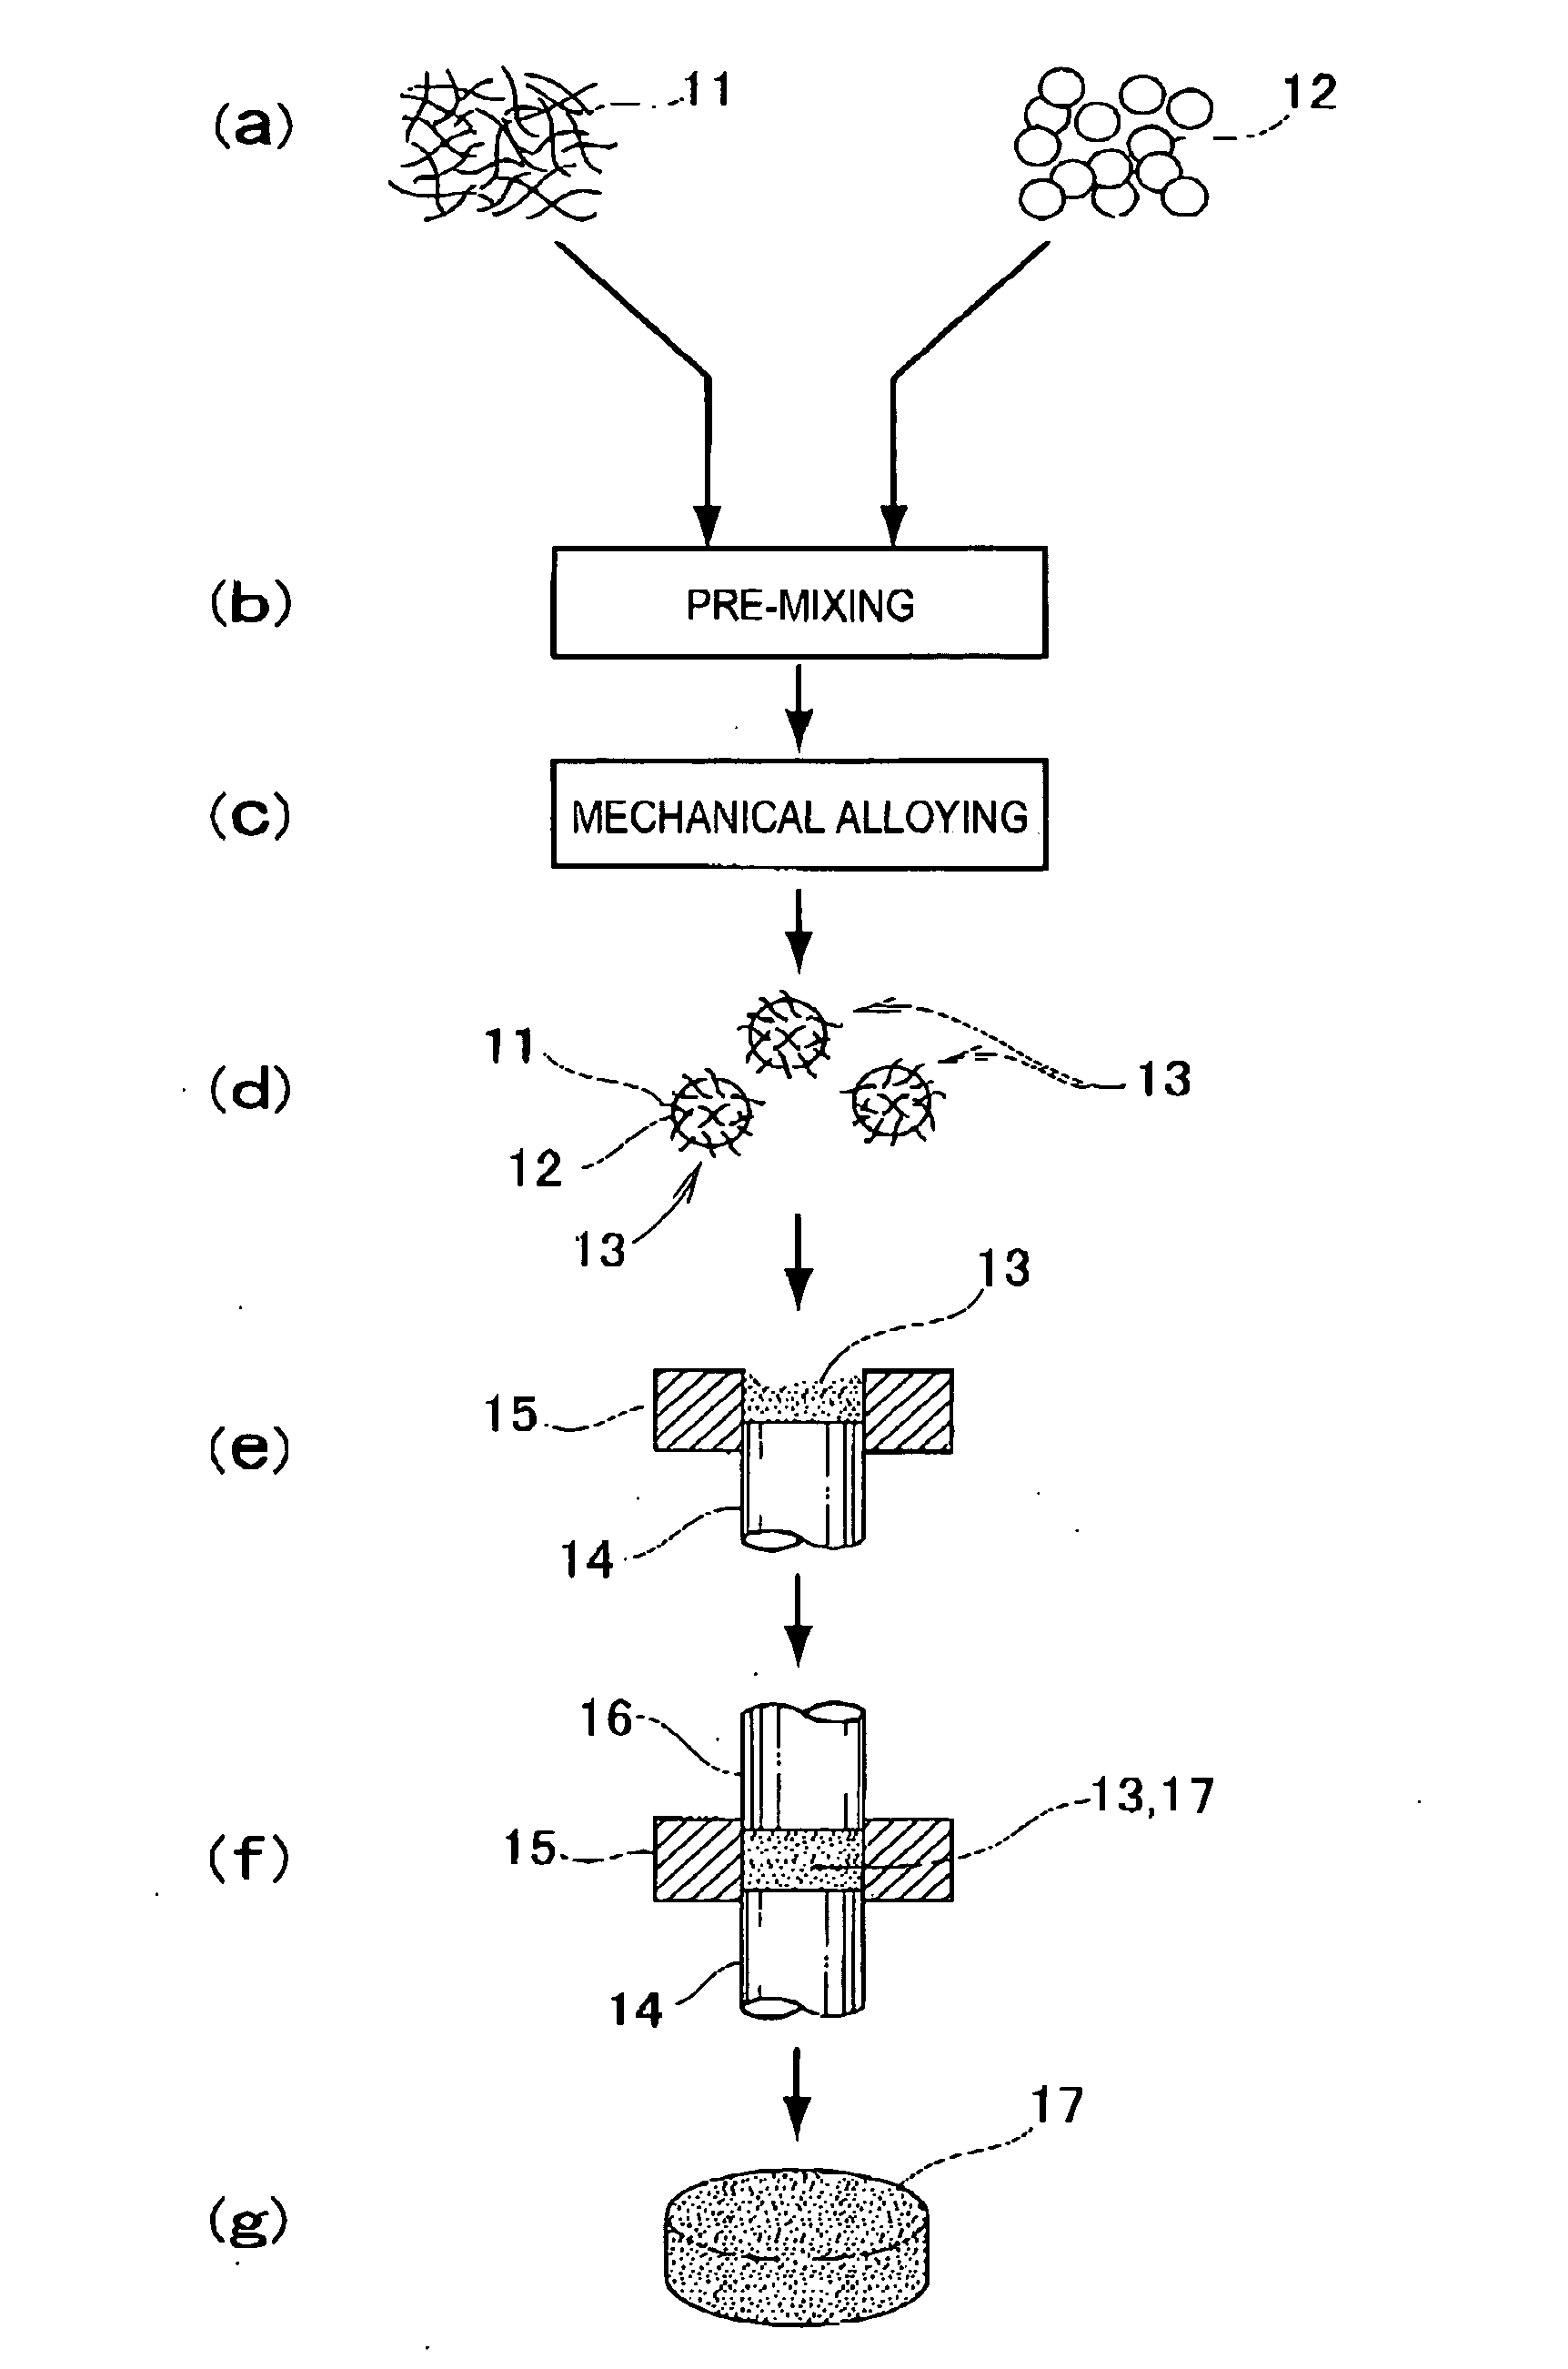 Method for manufacturing composite metal alloy and method for manufacturing article from composite metal